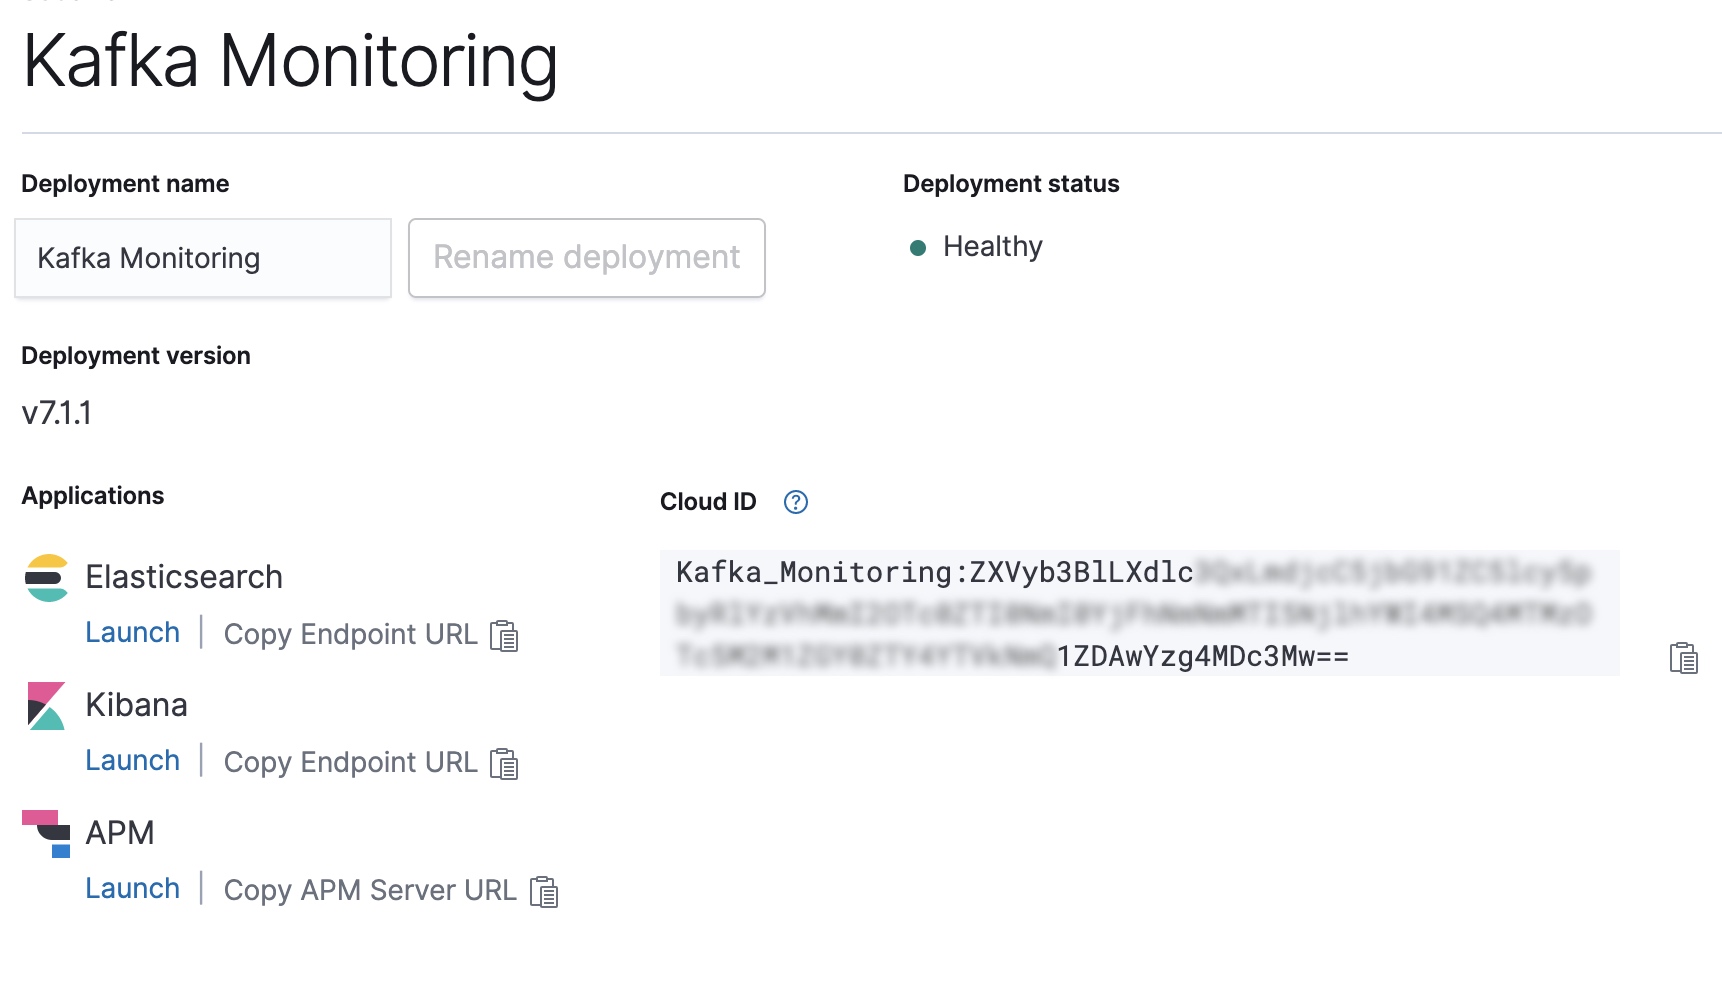 Copying and configuring the Cloud ID